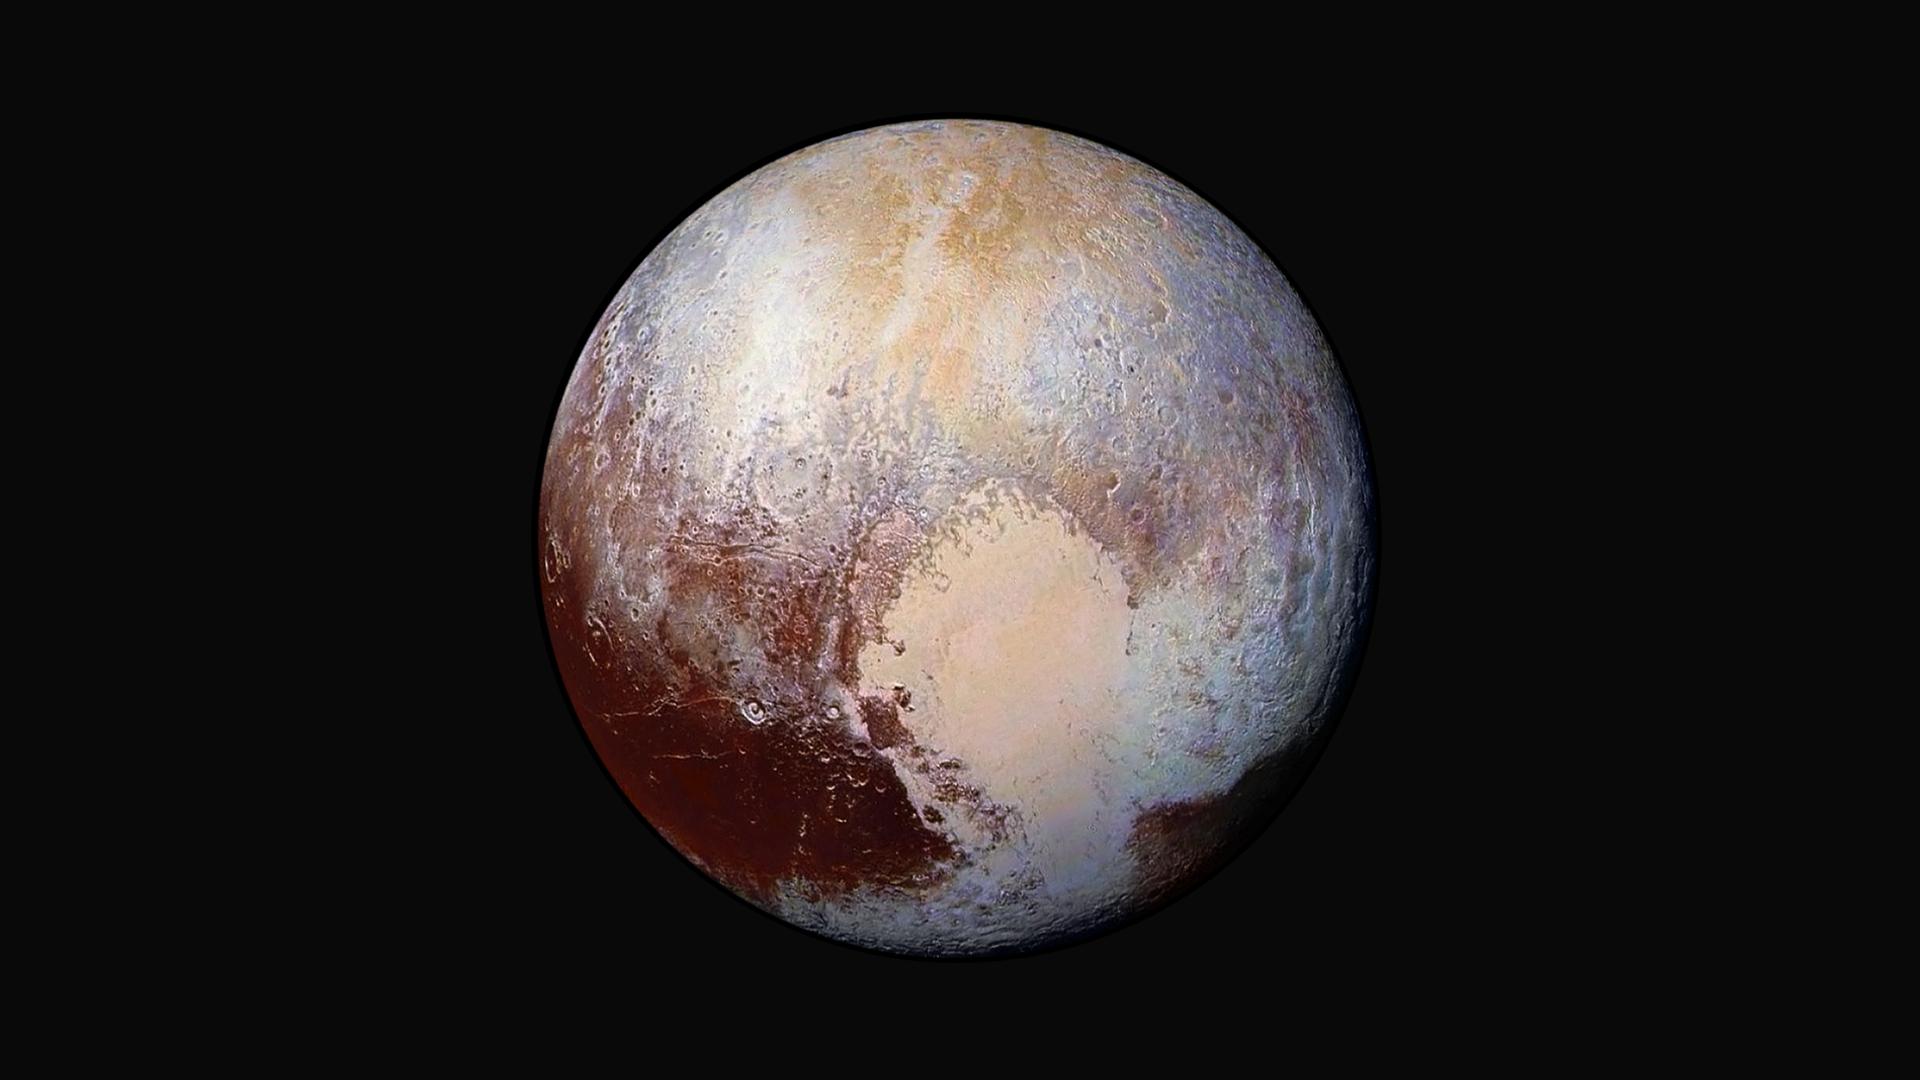 10 Things You Probably Don't Know About Pluto